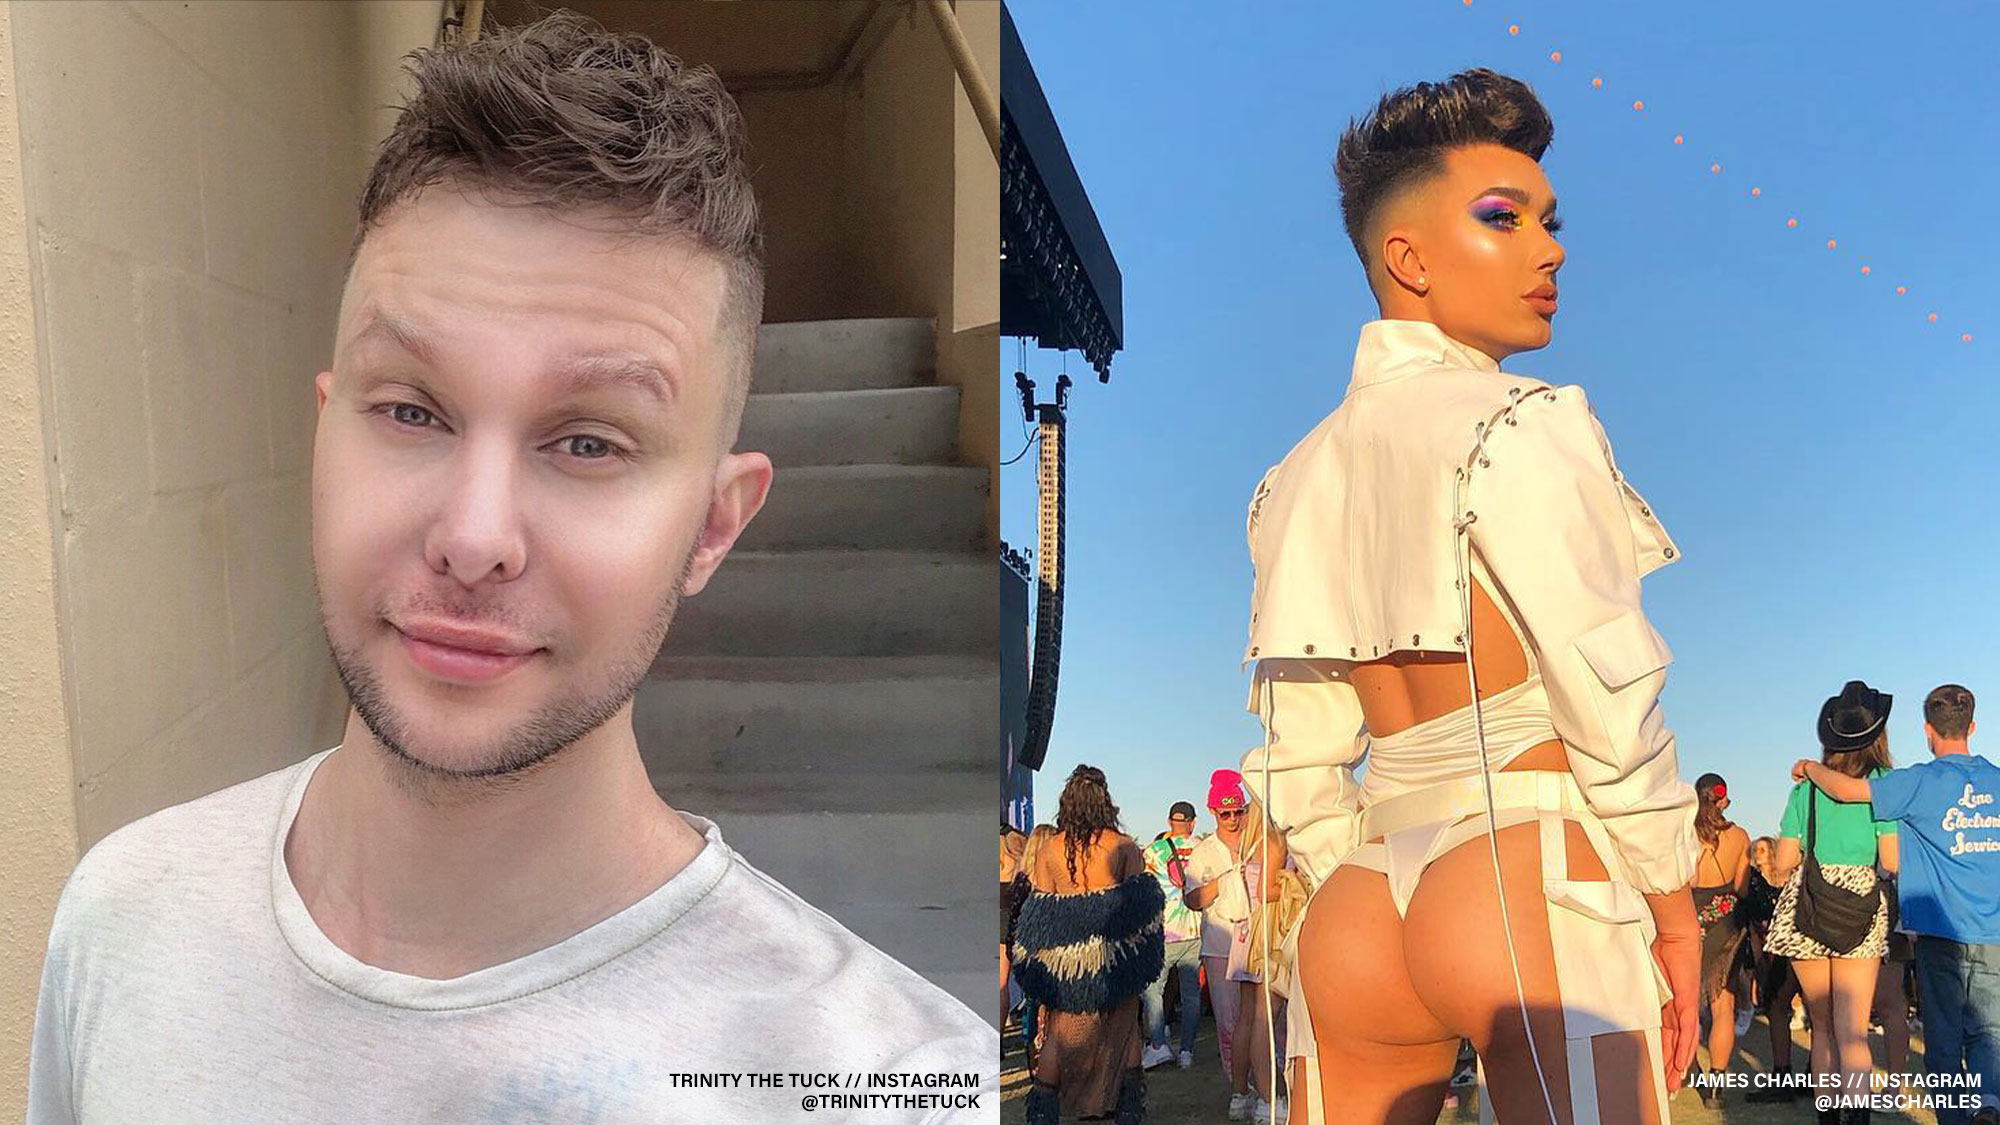 Trinity the Tuck & James Charles get in the dumbest Twitter fight over James...